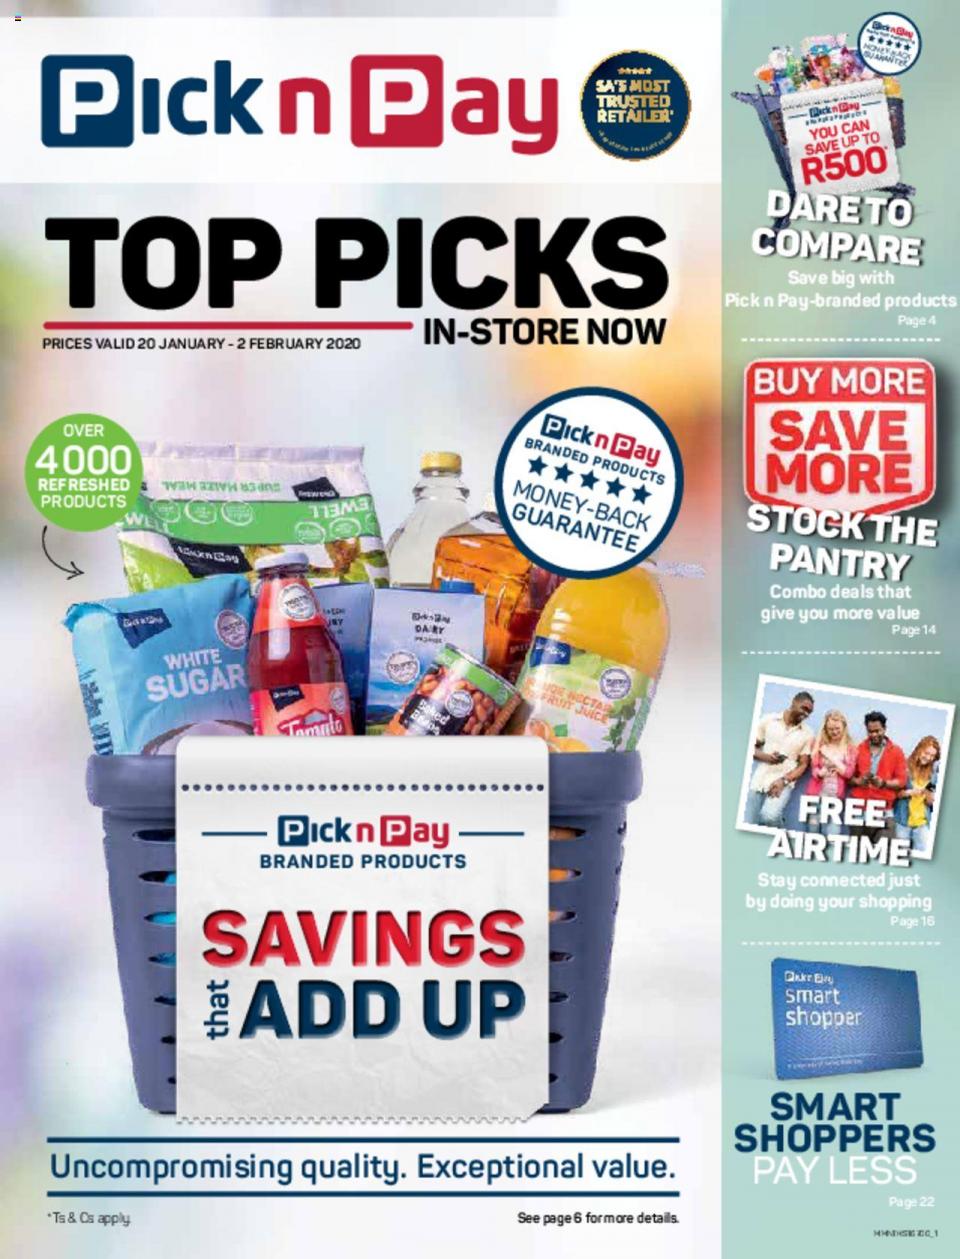 Pick n Pay Specials Top Picks 20 January 2020